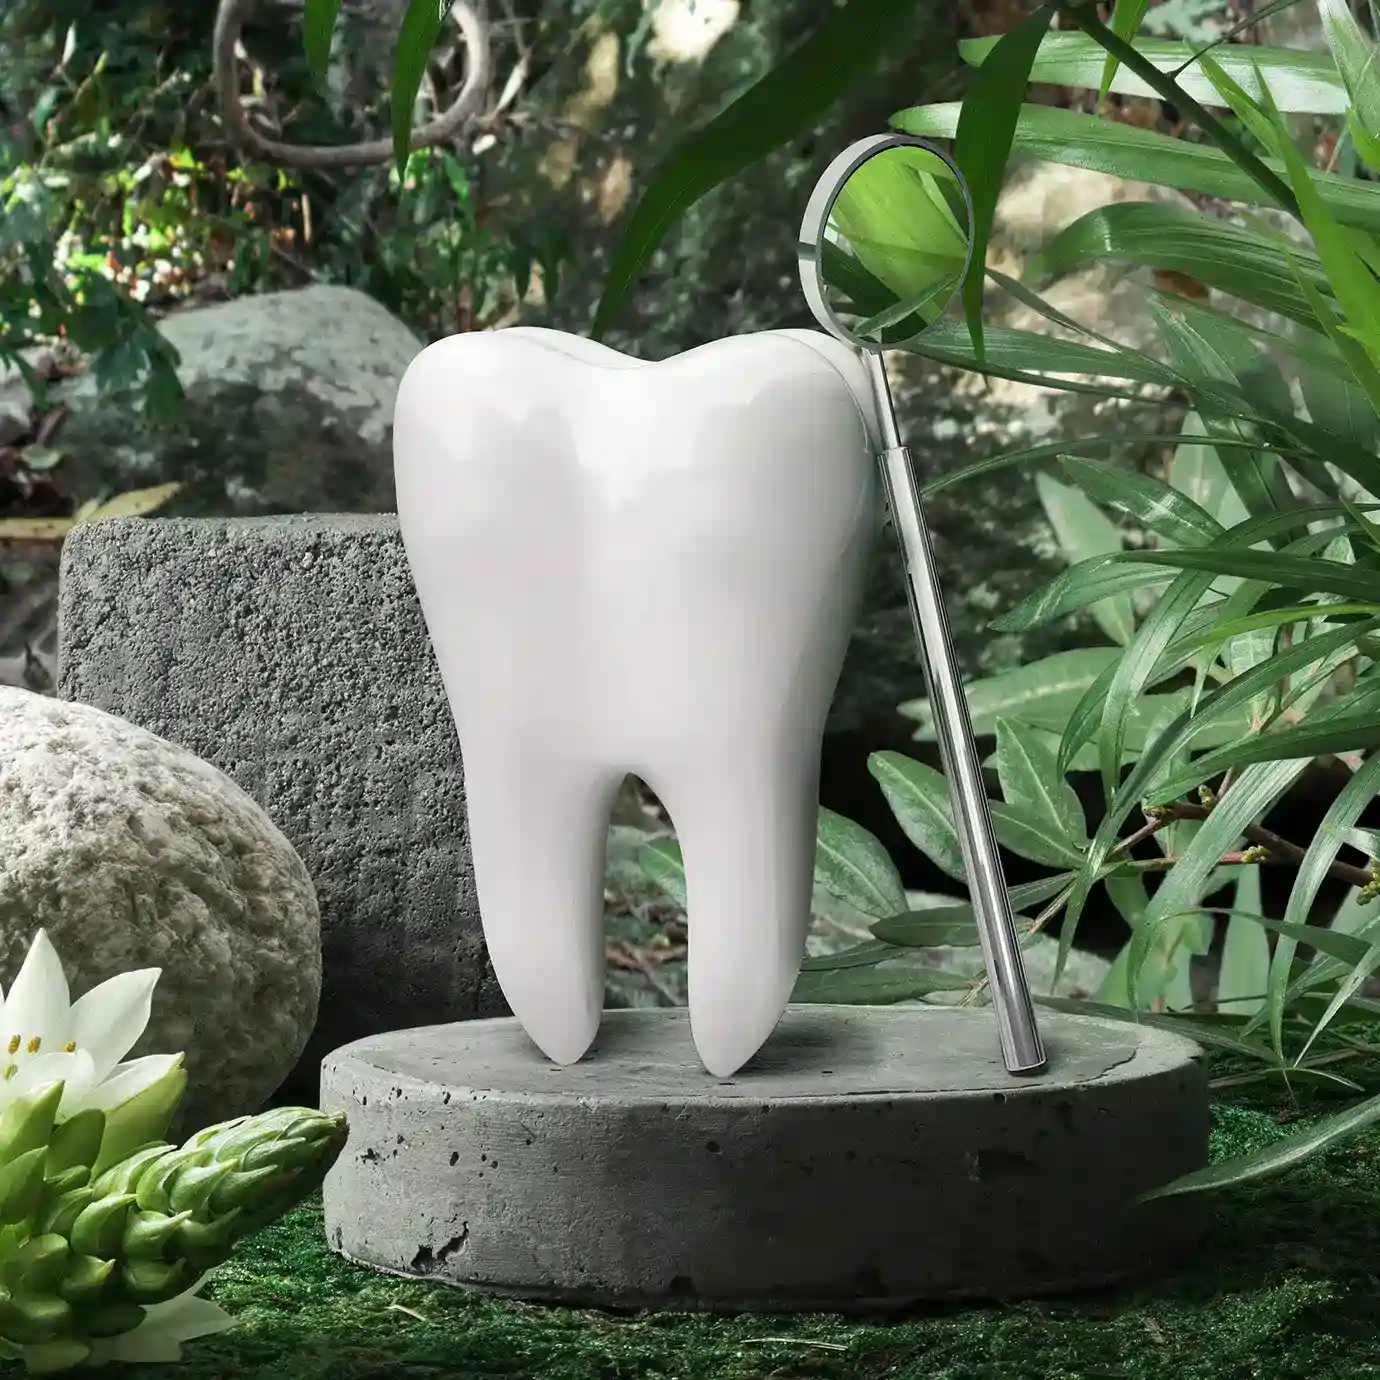 Why Green Dentistry? 